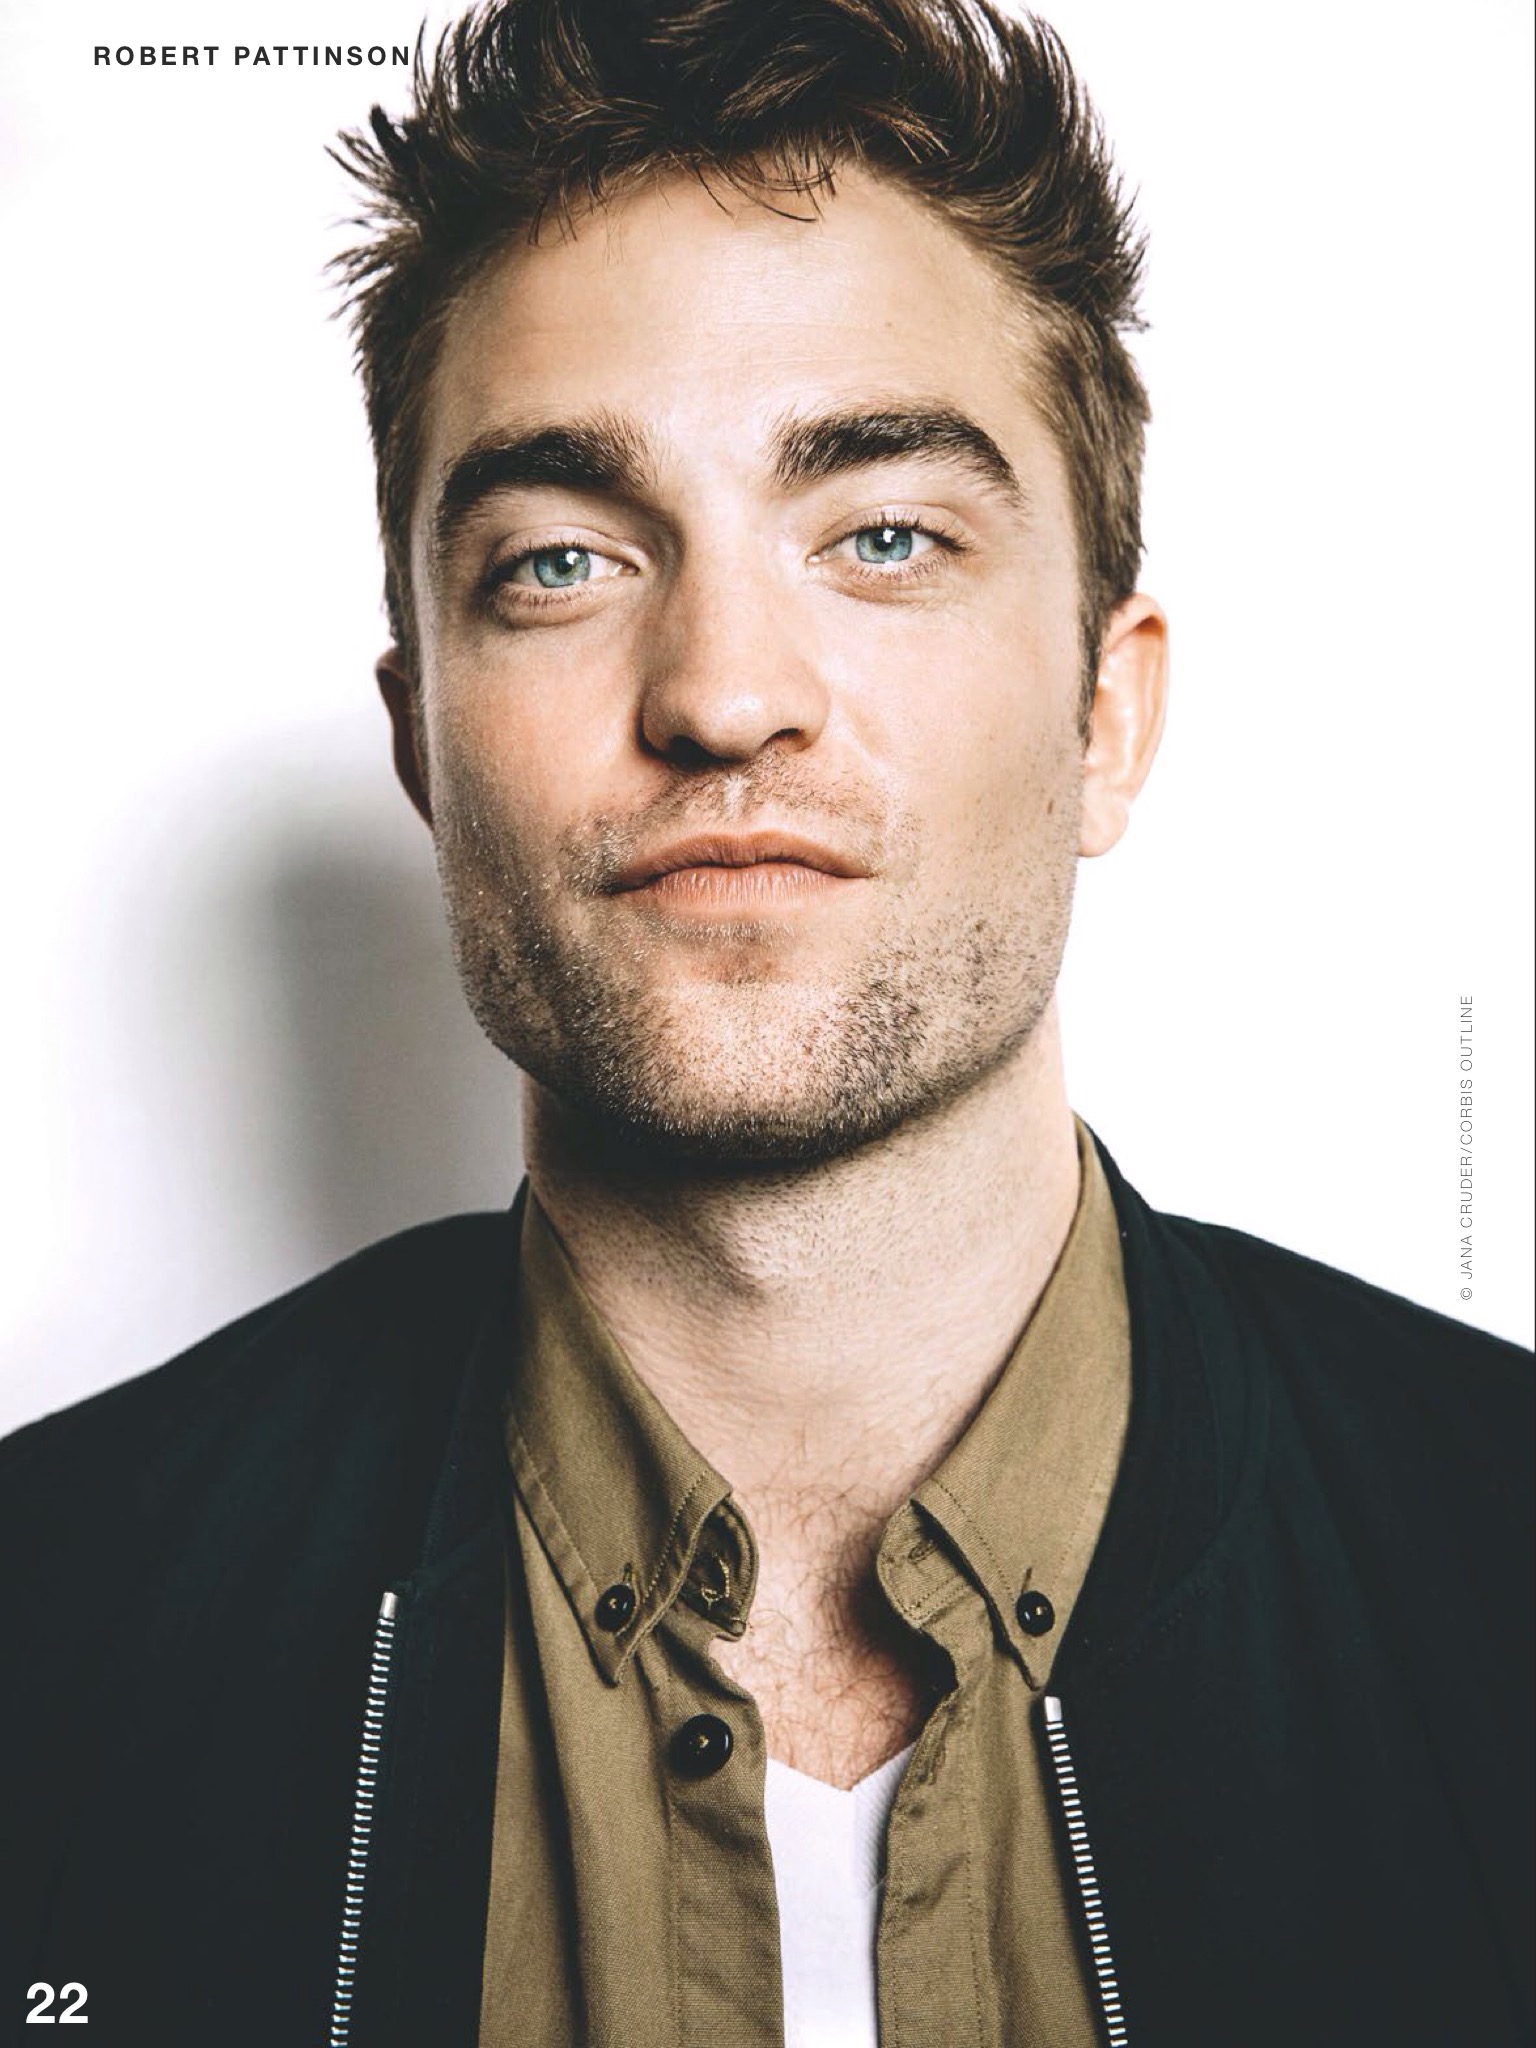 Robert Pattinson on the cover of NME Magazine | Thinking of Rob